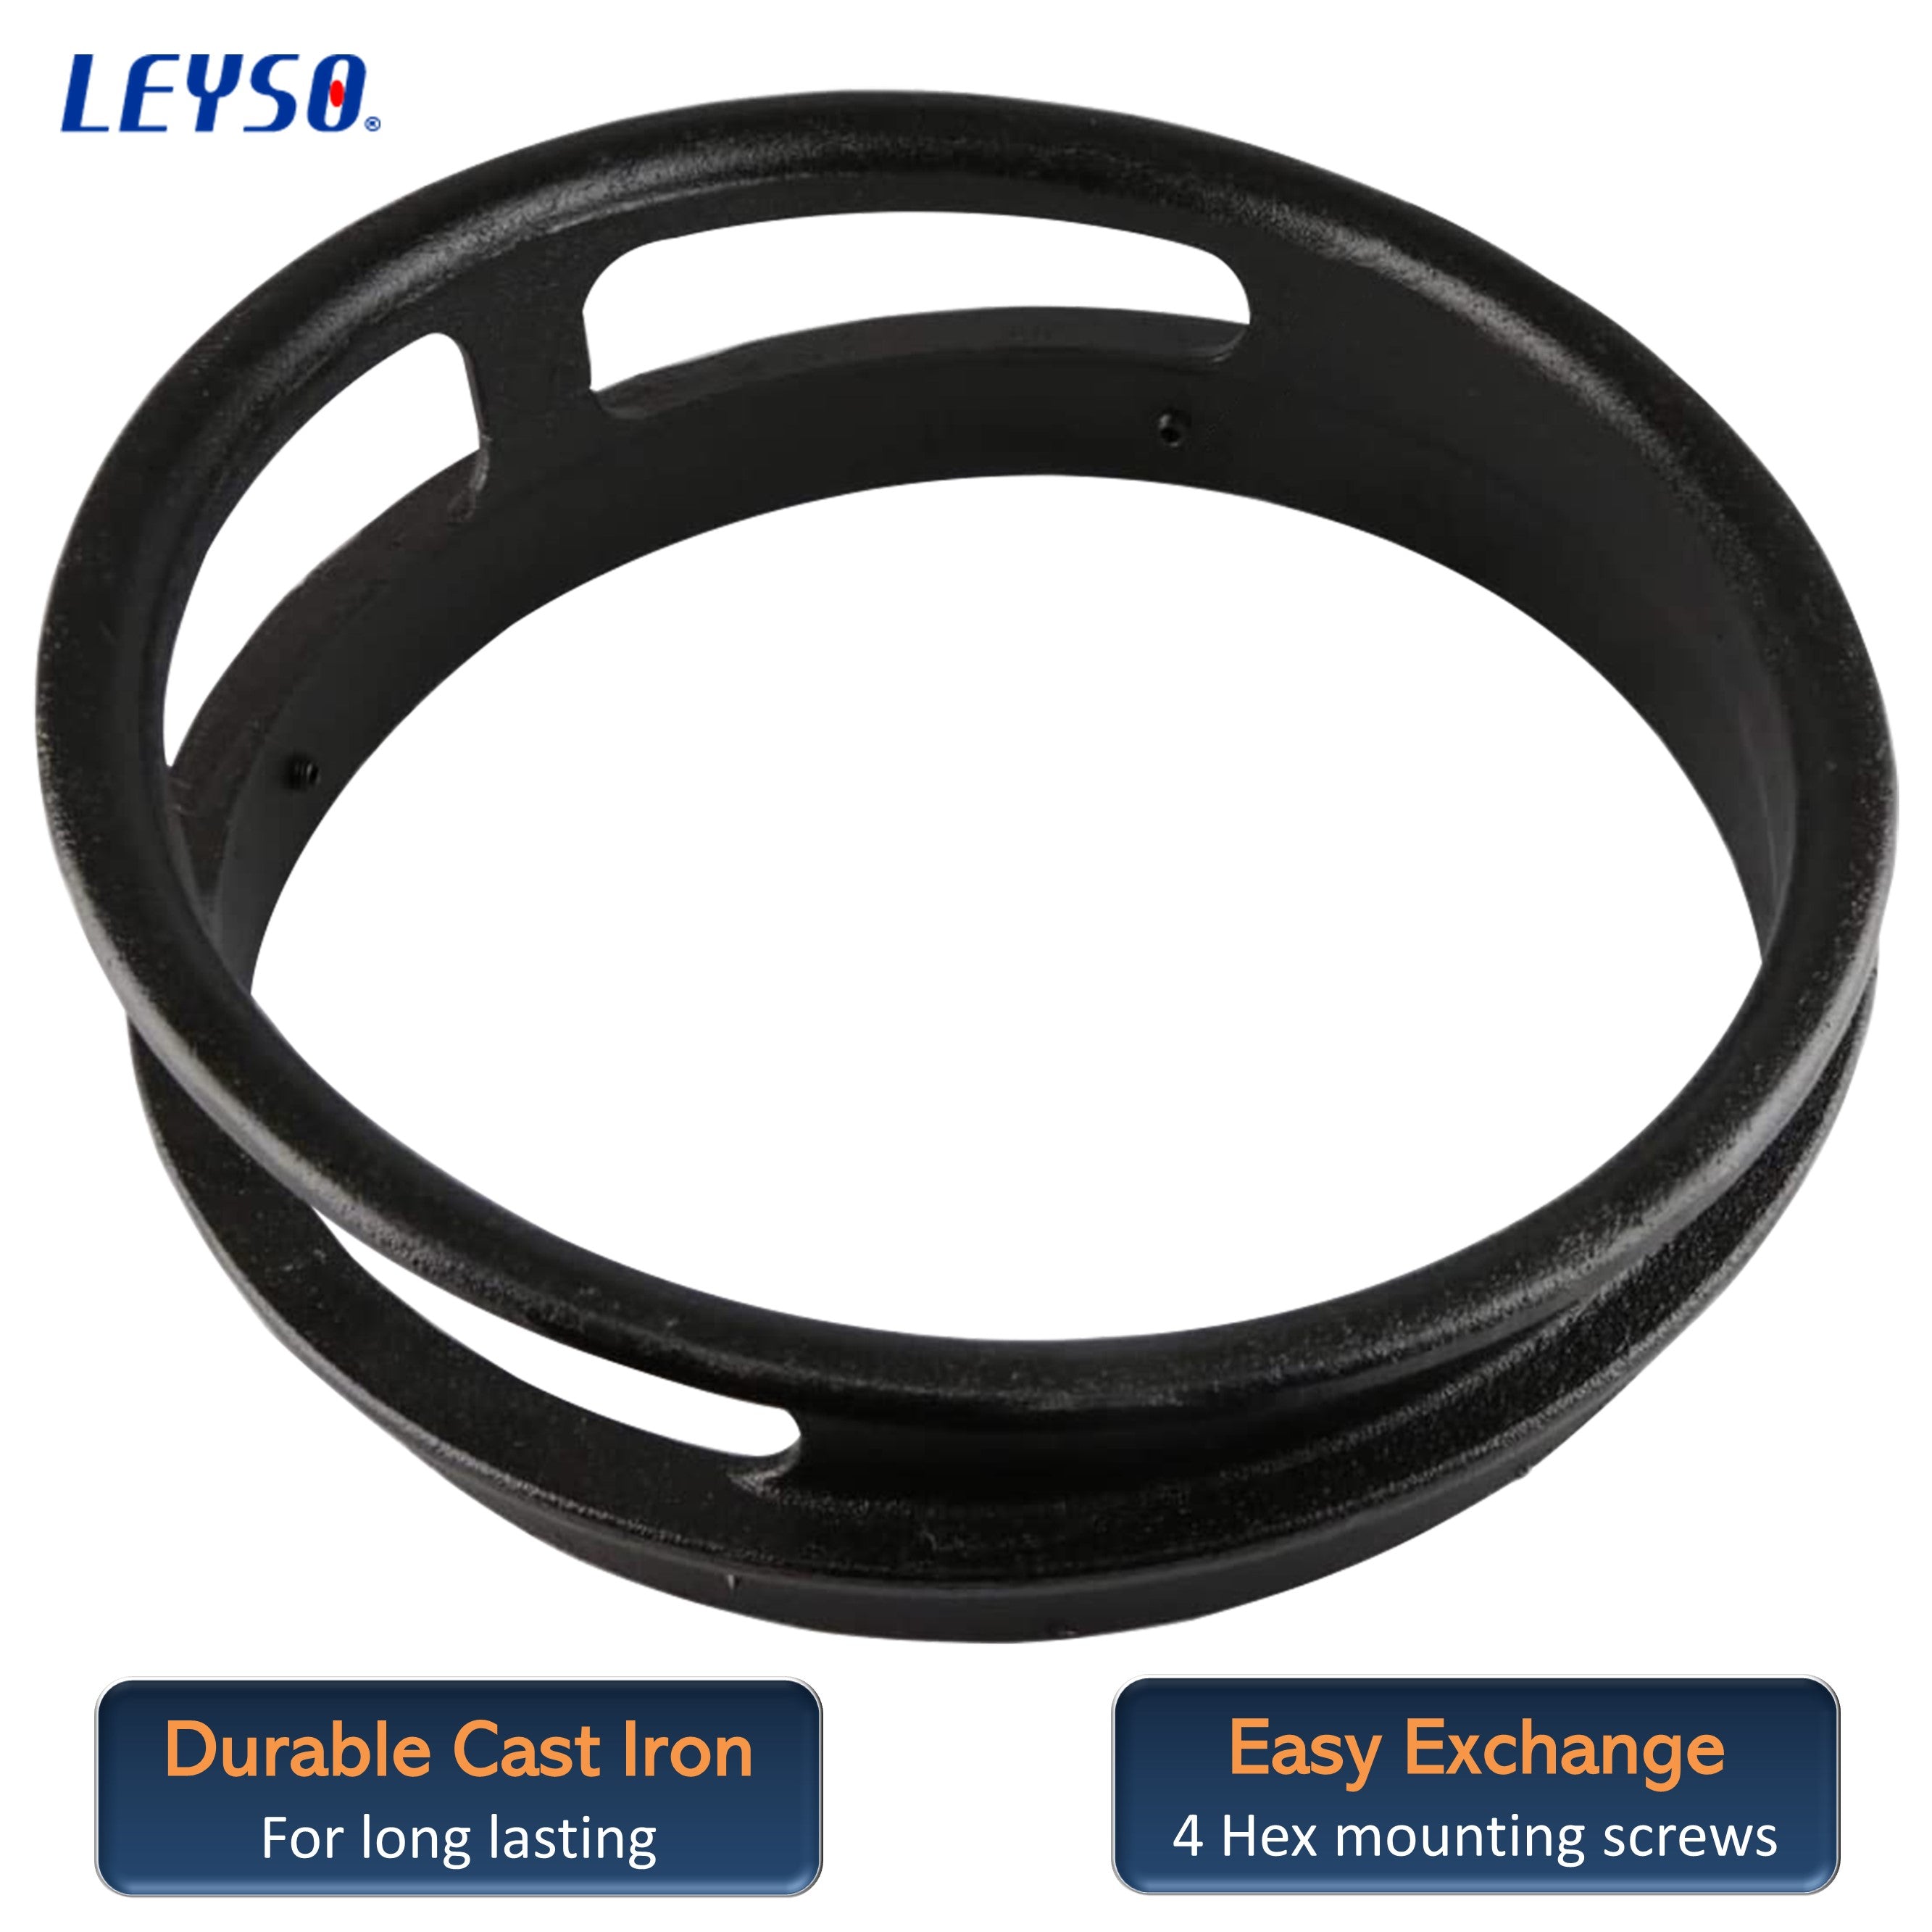 Leyso 13” Diameter 3 Opening Cast Iron Rim to Replace the Worn Out Wok Ring for Chinese Wok Range